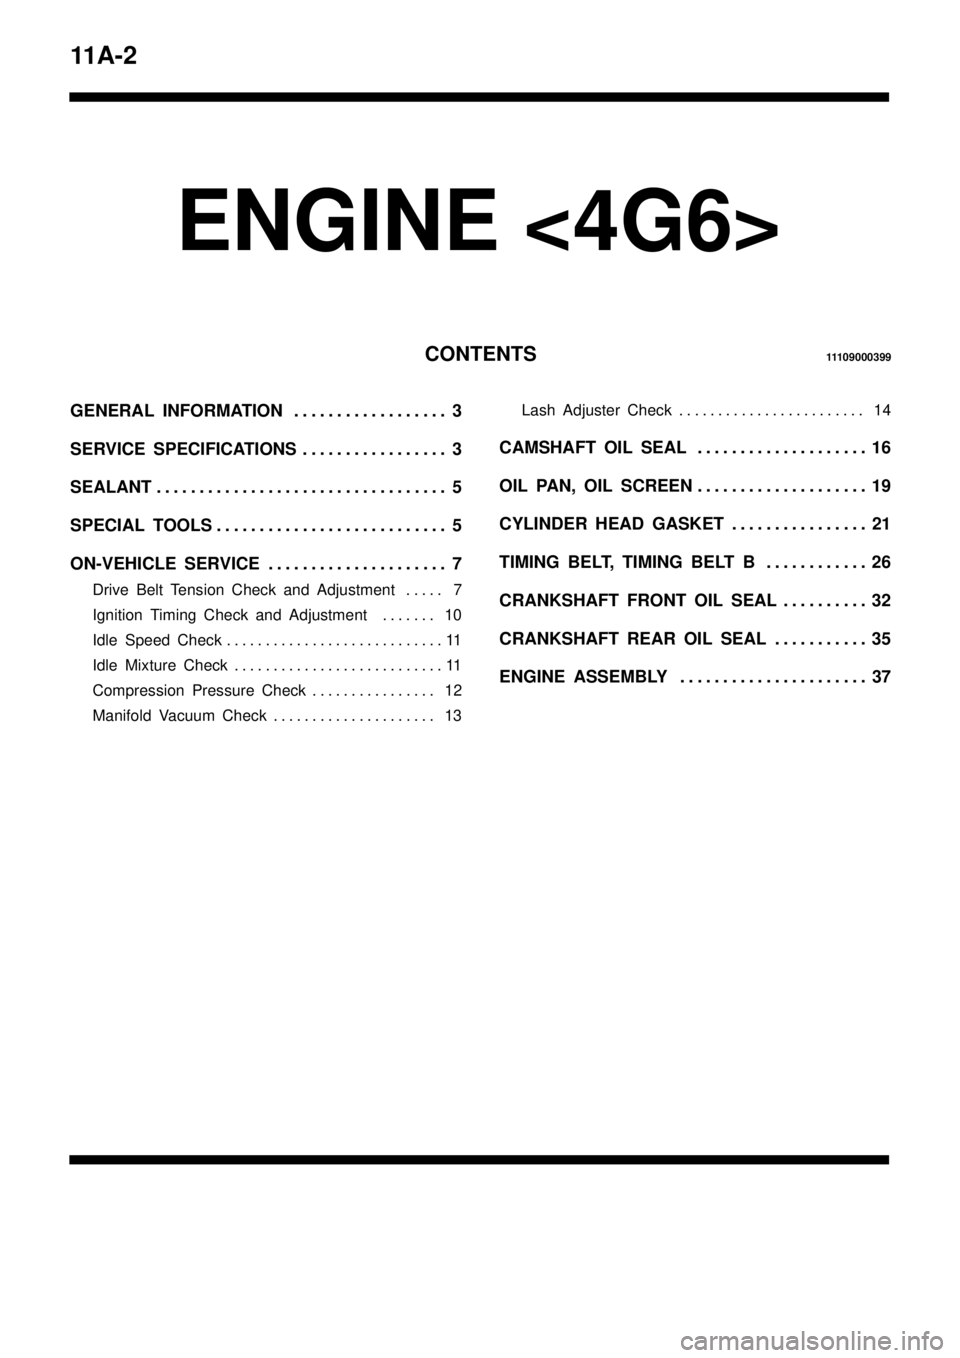 MITSUBISHI TRITON 1997  Workshop Manual 11A-2
ENGINE <4G6>
CONTENTS11109000399
GENERAL INFORMATION 3. . . . . . . . . . . . . . . . . . 
SERVICE SPECIFICATIONS 3. . . . . . . . . . . . . . . . . 
SEALANT 5. . . . . . . . . . . . . . . . . .